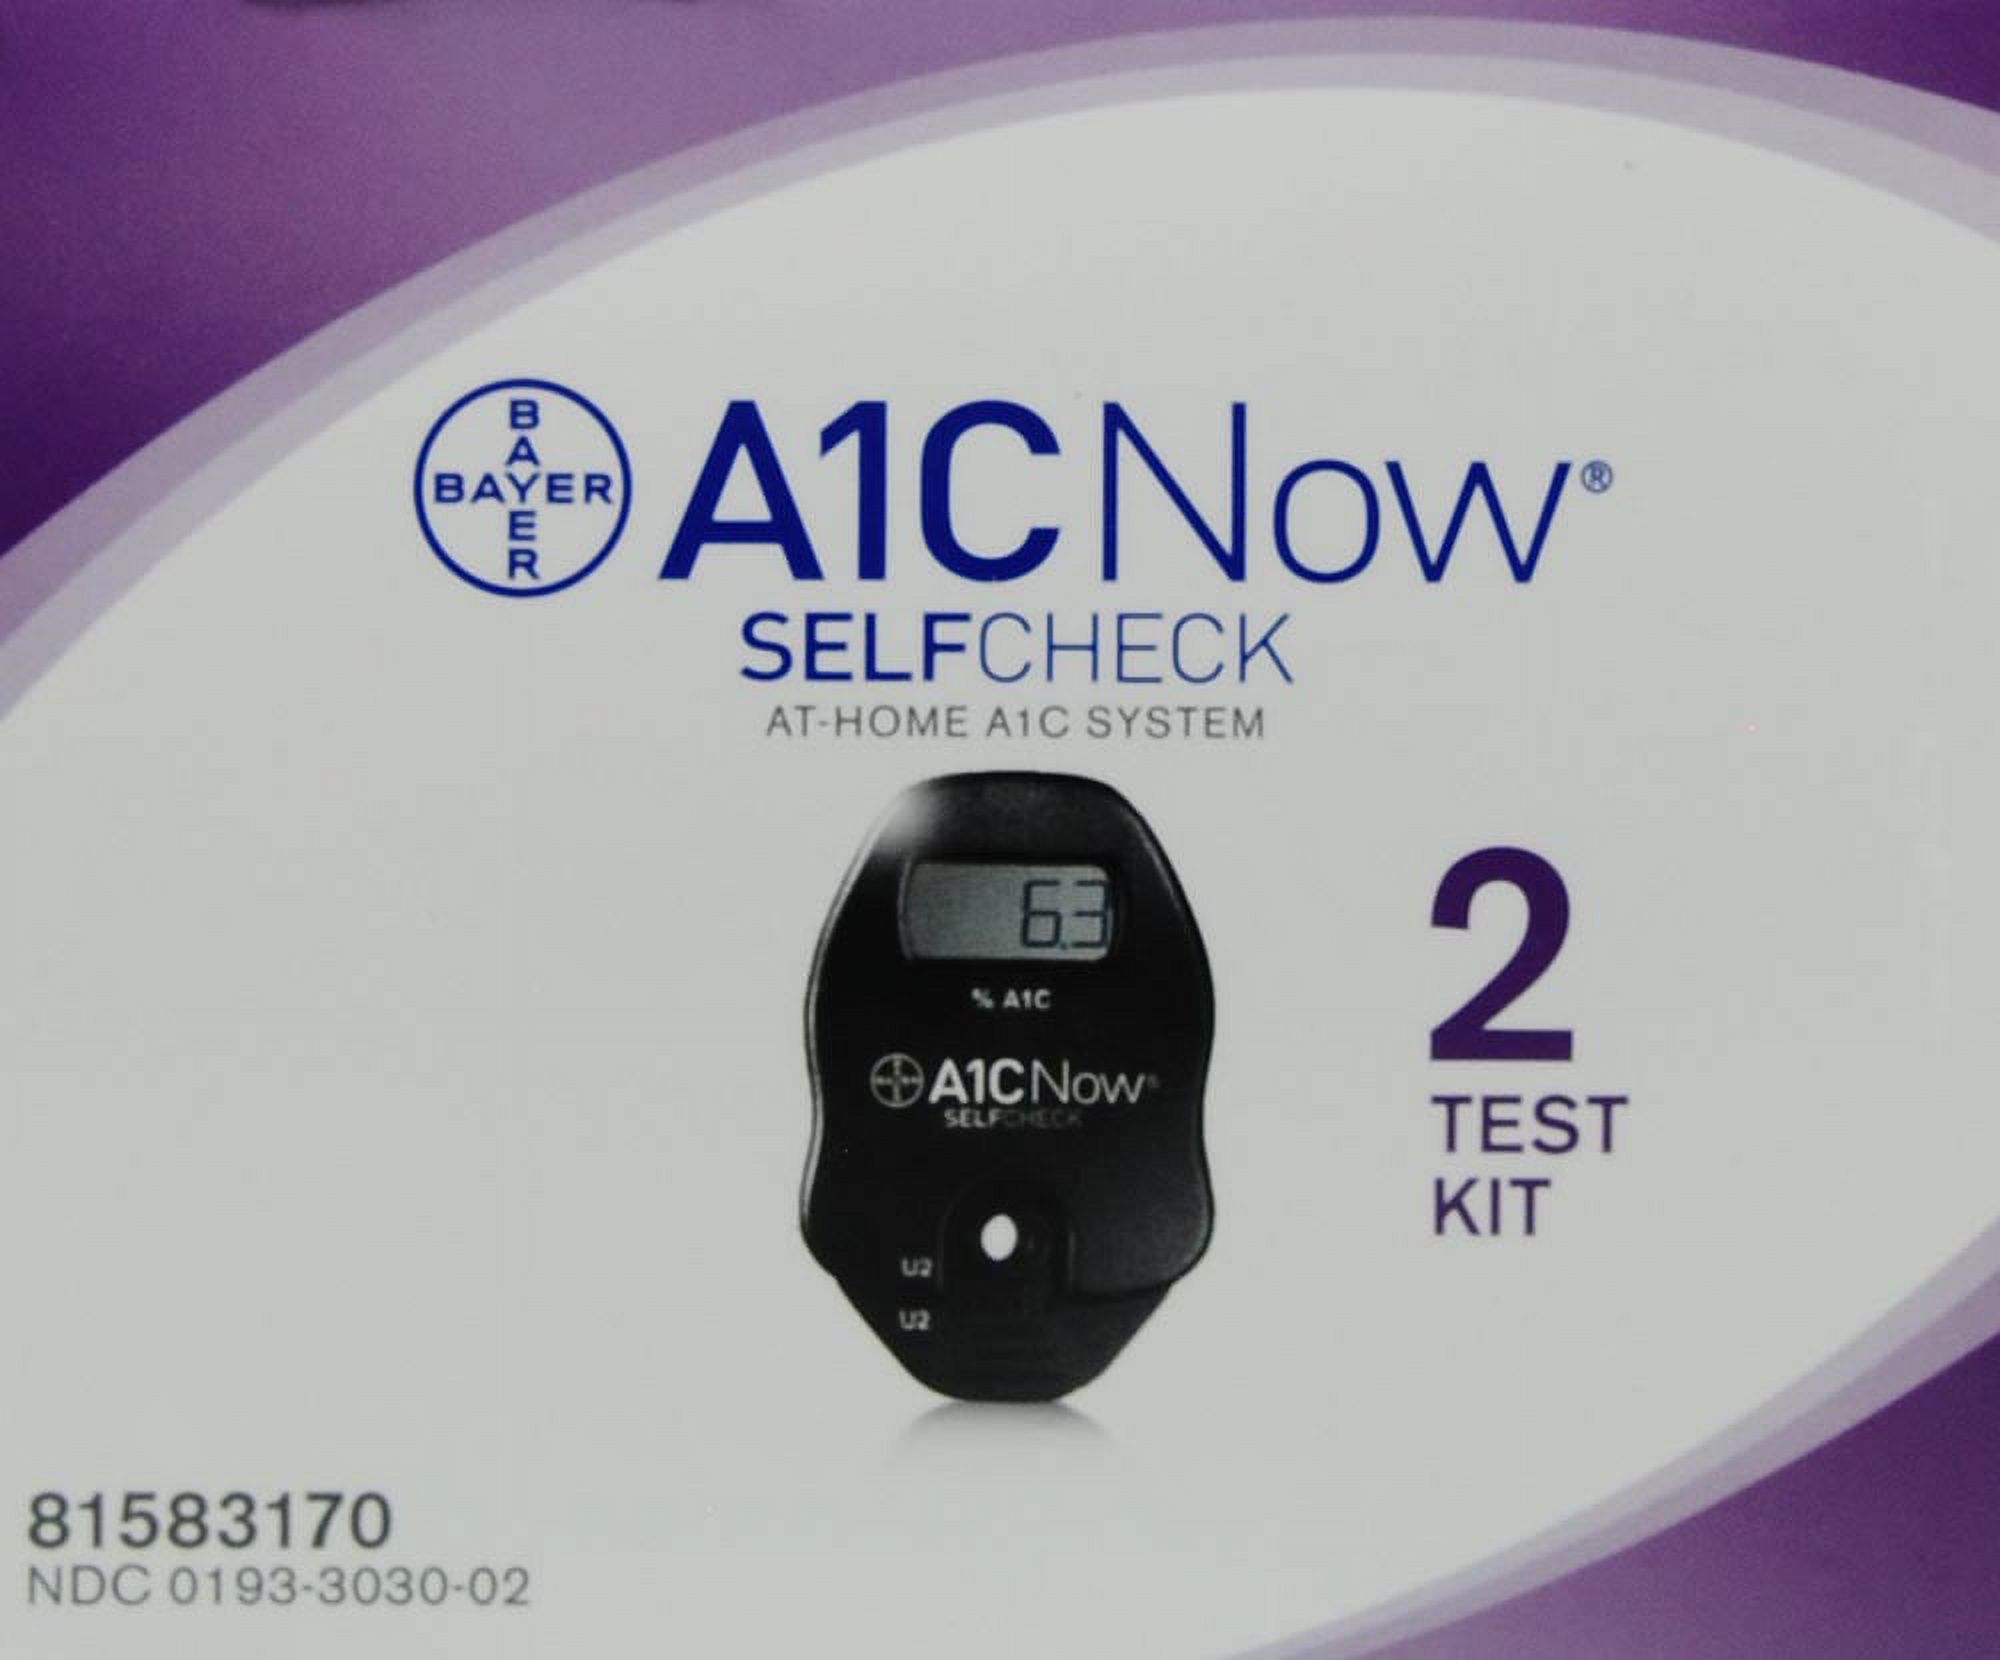 A1CNOW Self Check (2 Count Test) - image 4 of 4